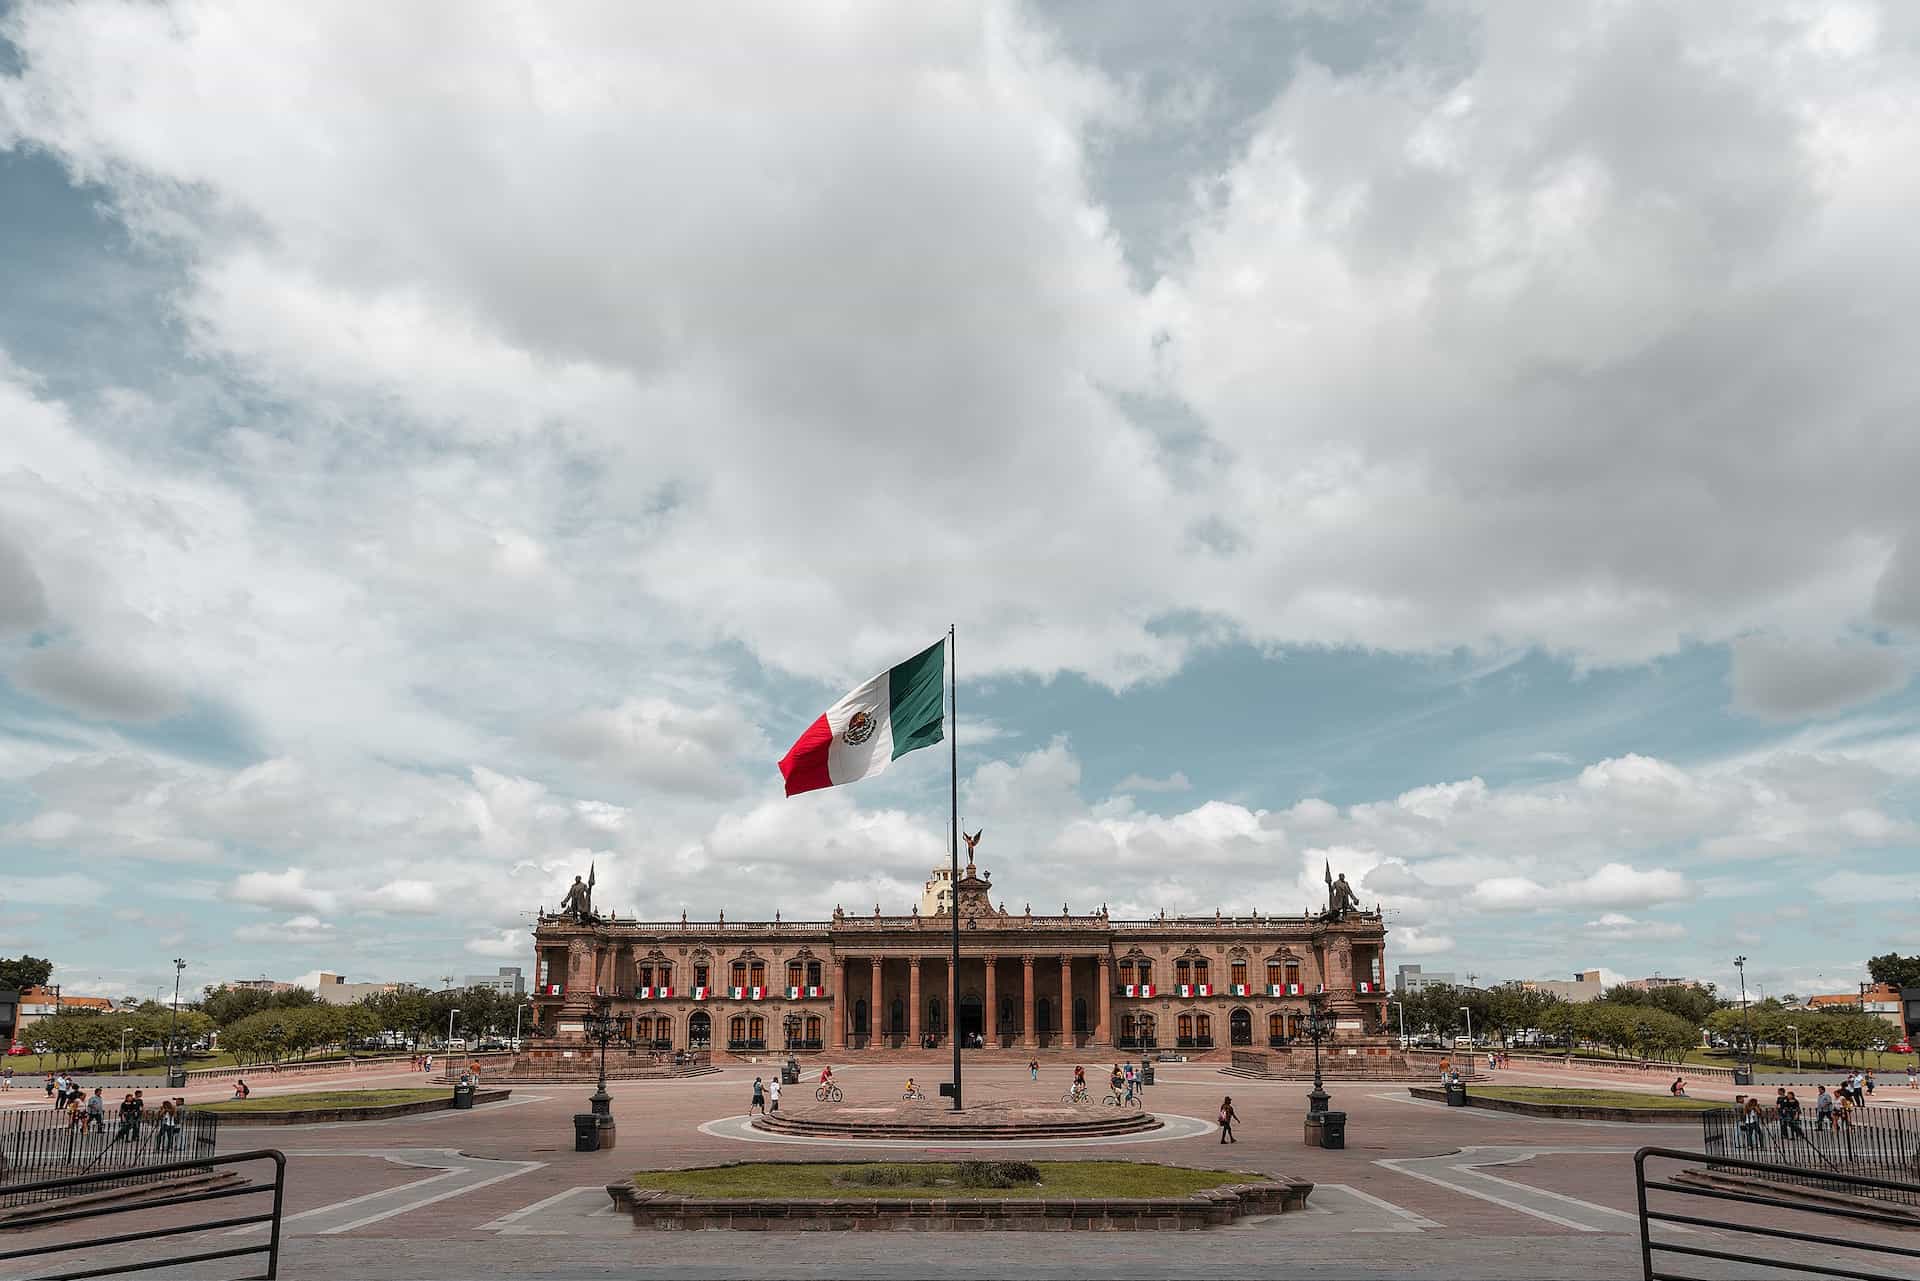 A Mexican flag waves about a prominent government building with columns on a plaza in Monterrey, Mexico.